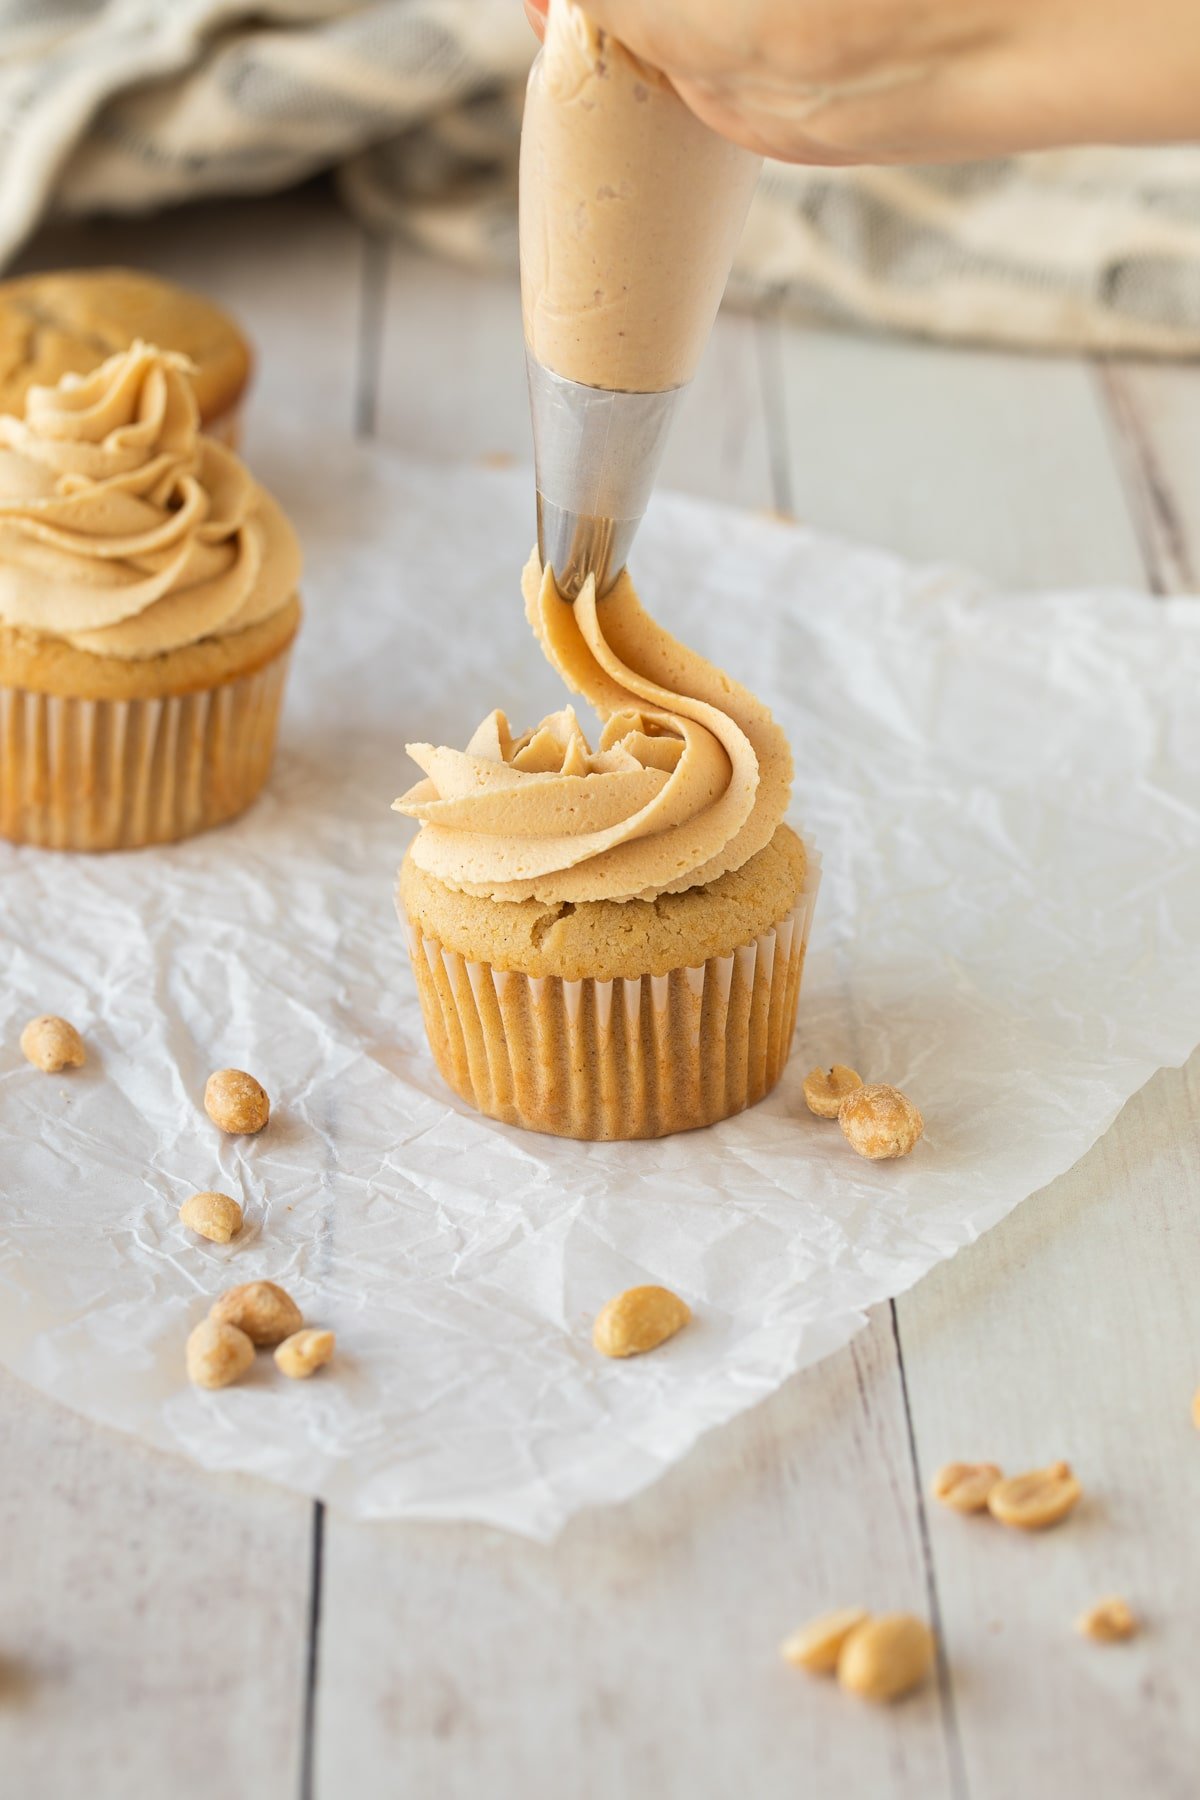 piping peanut butter frosting on cupcake.